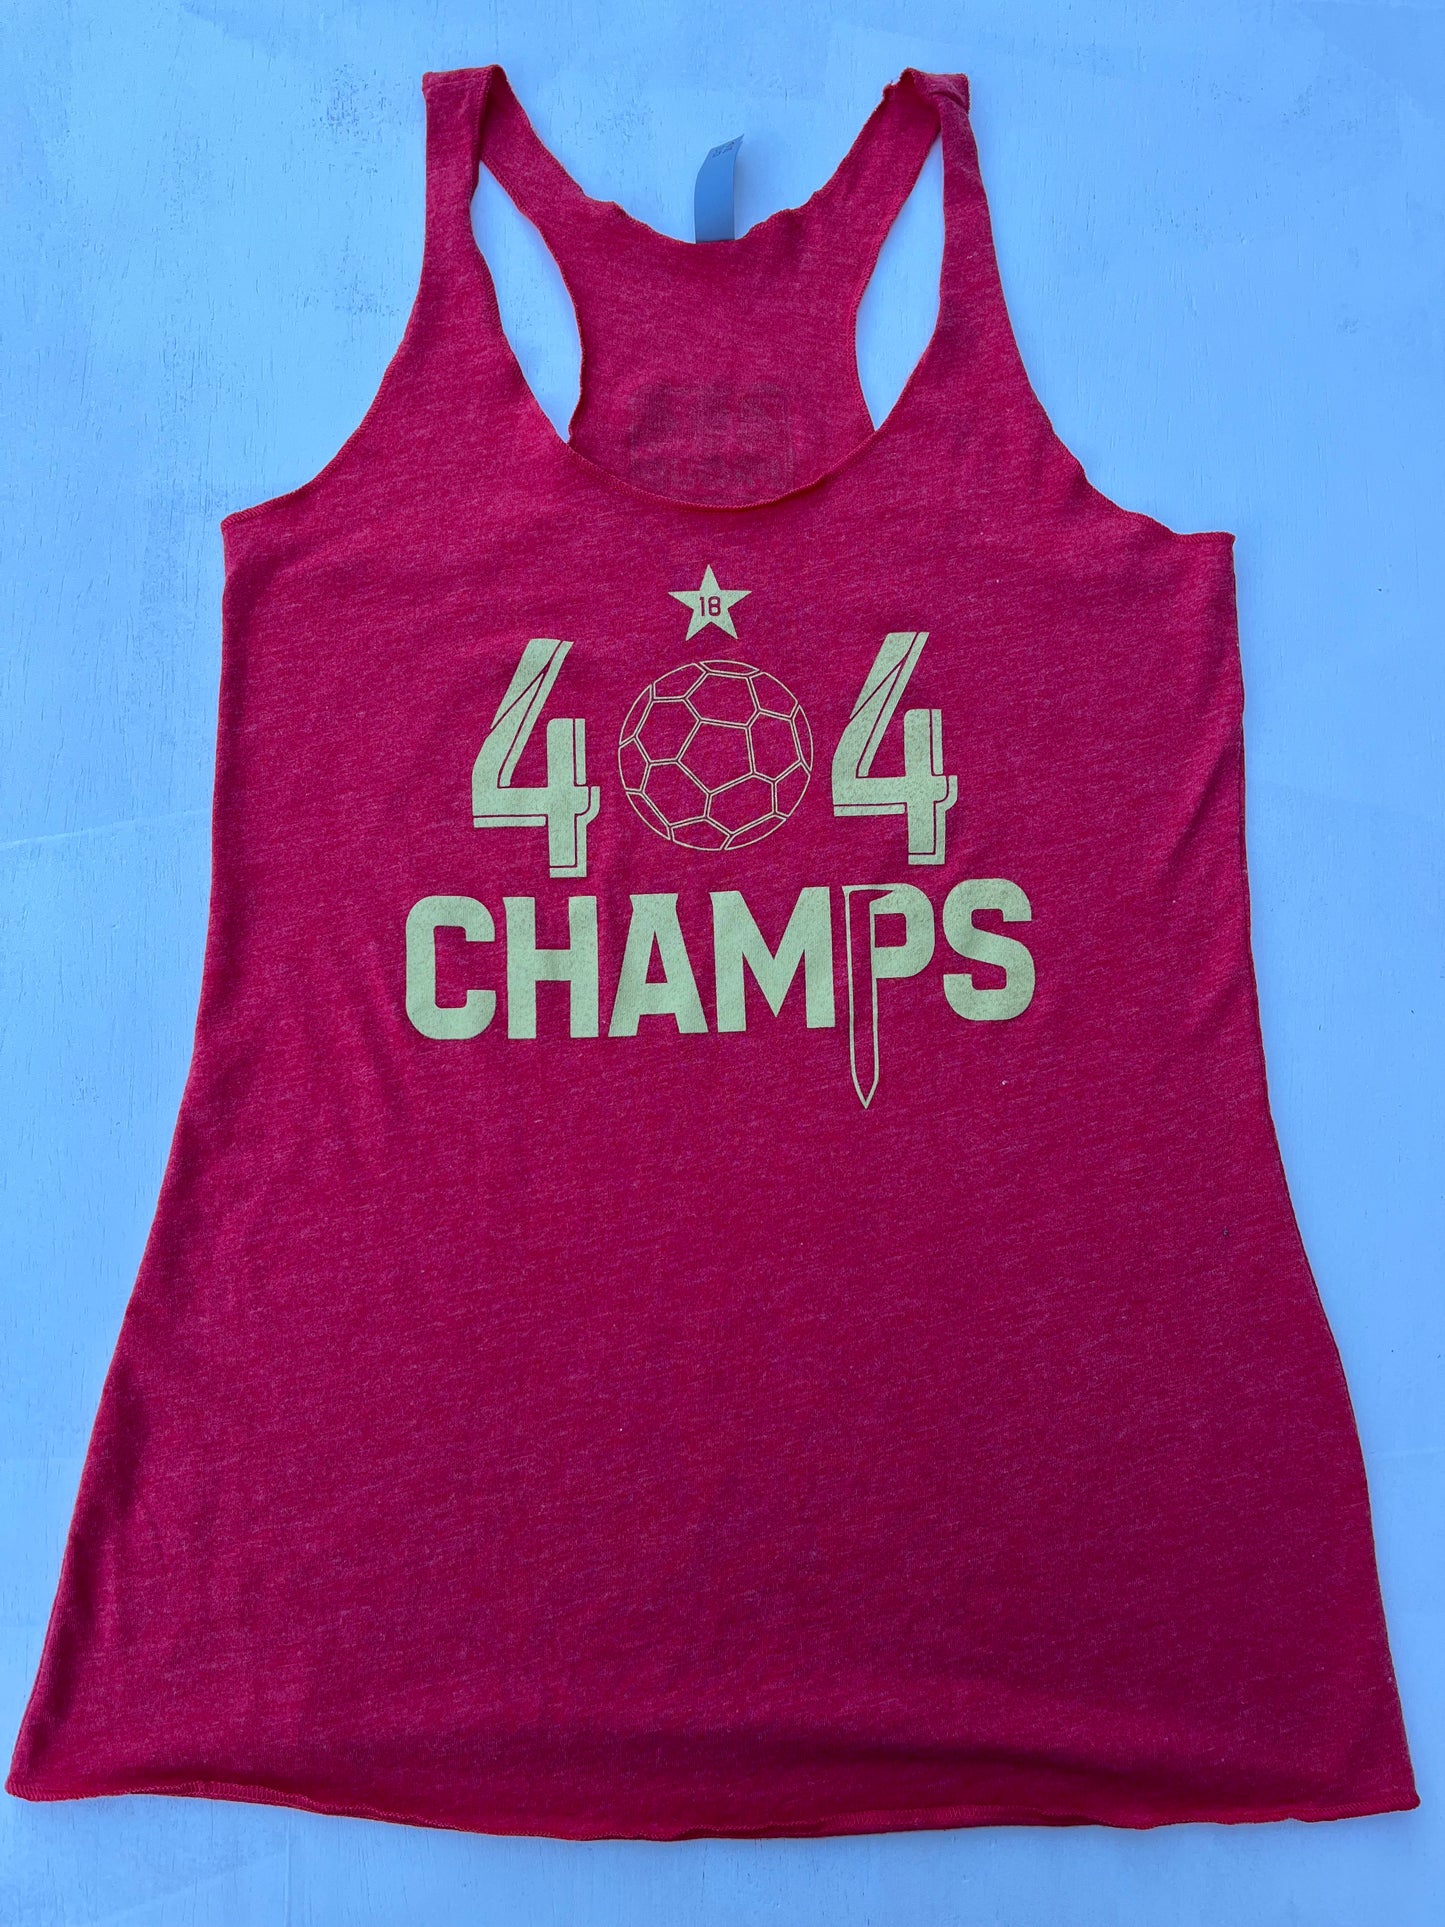 404 Champs Red Ladies' Racerback Tank